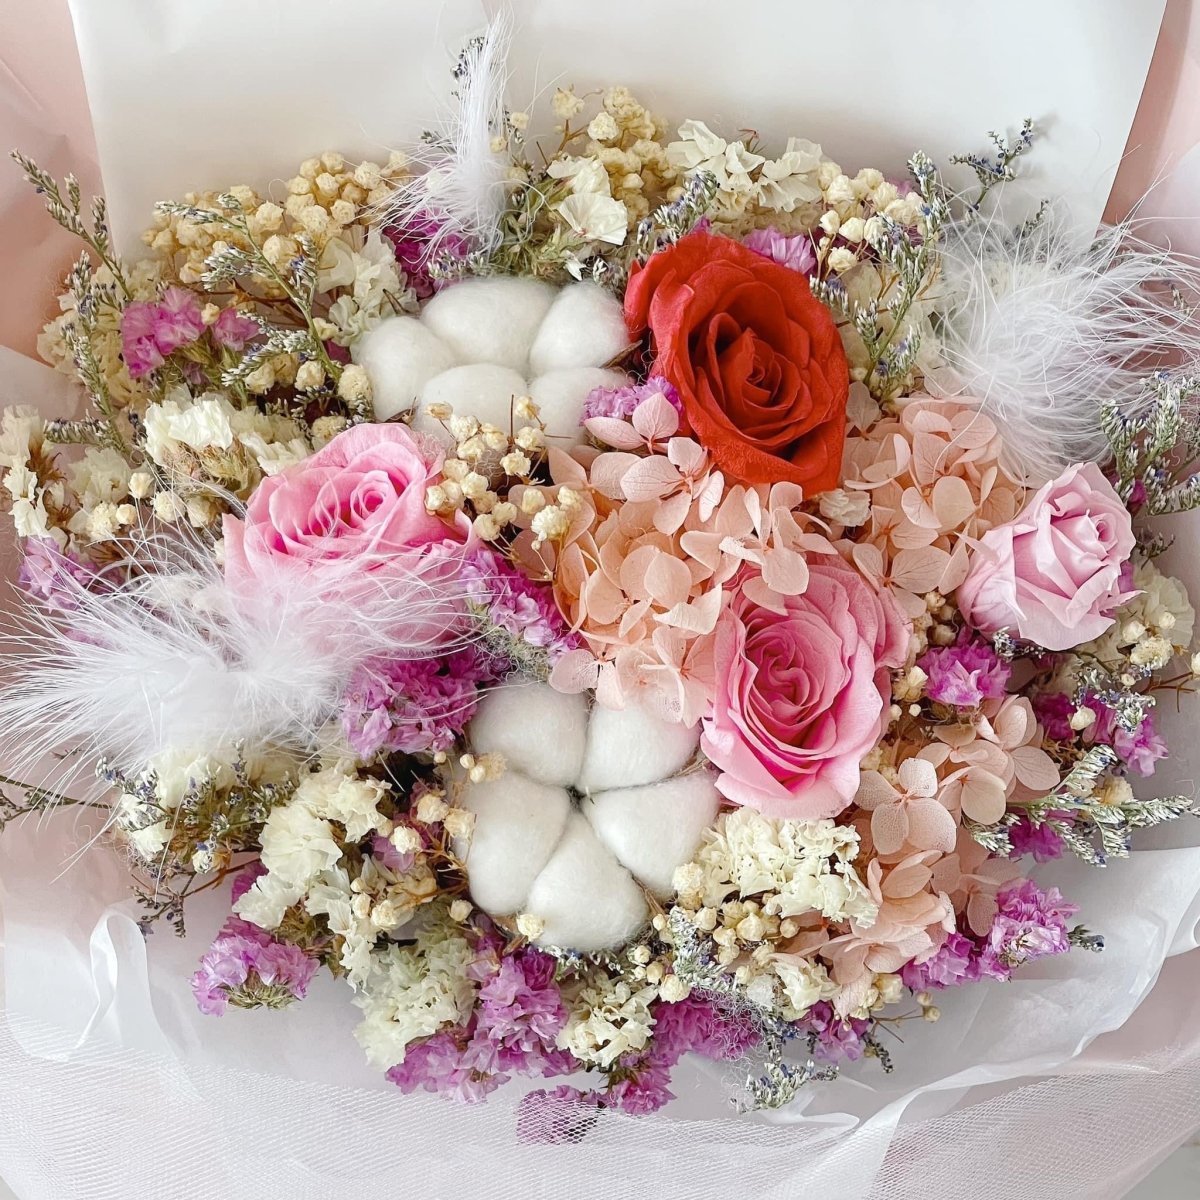 Passionate Floral - Everlasting Flower Bouquet (Real Preserved Roses and Dried Flowers)( Sold out) - Rainbowly Fresh Fruit Gift and Flower Arrangments